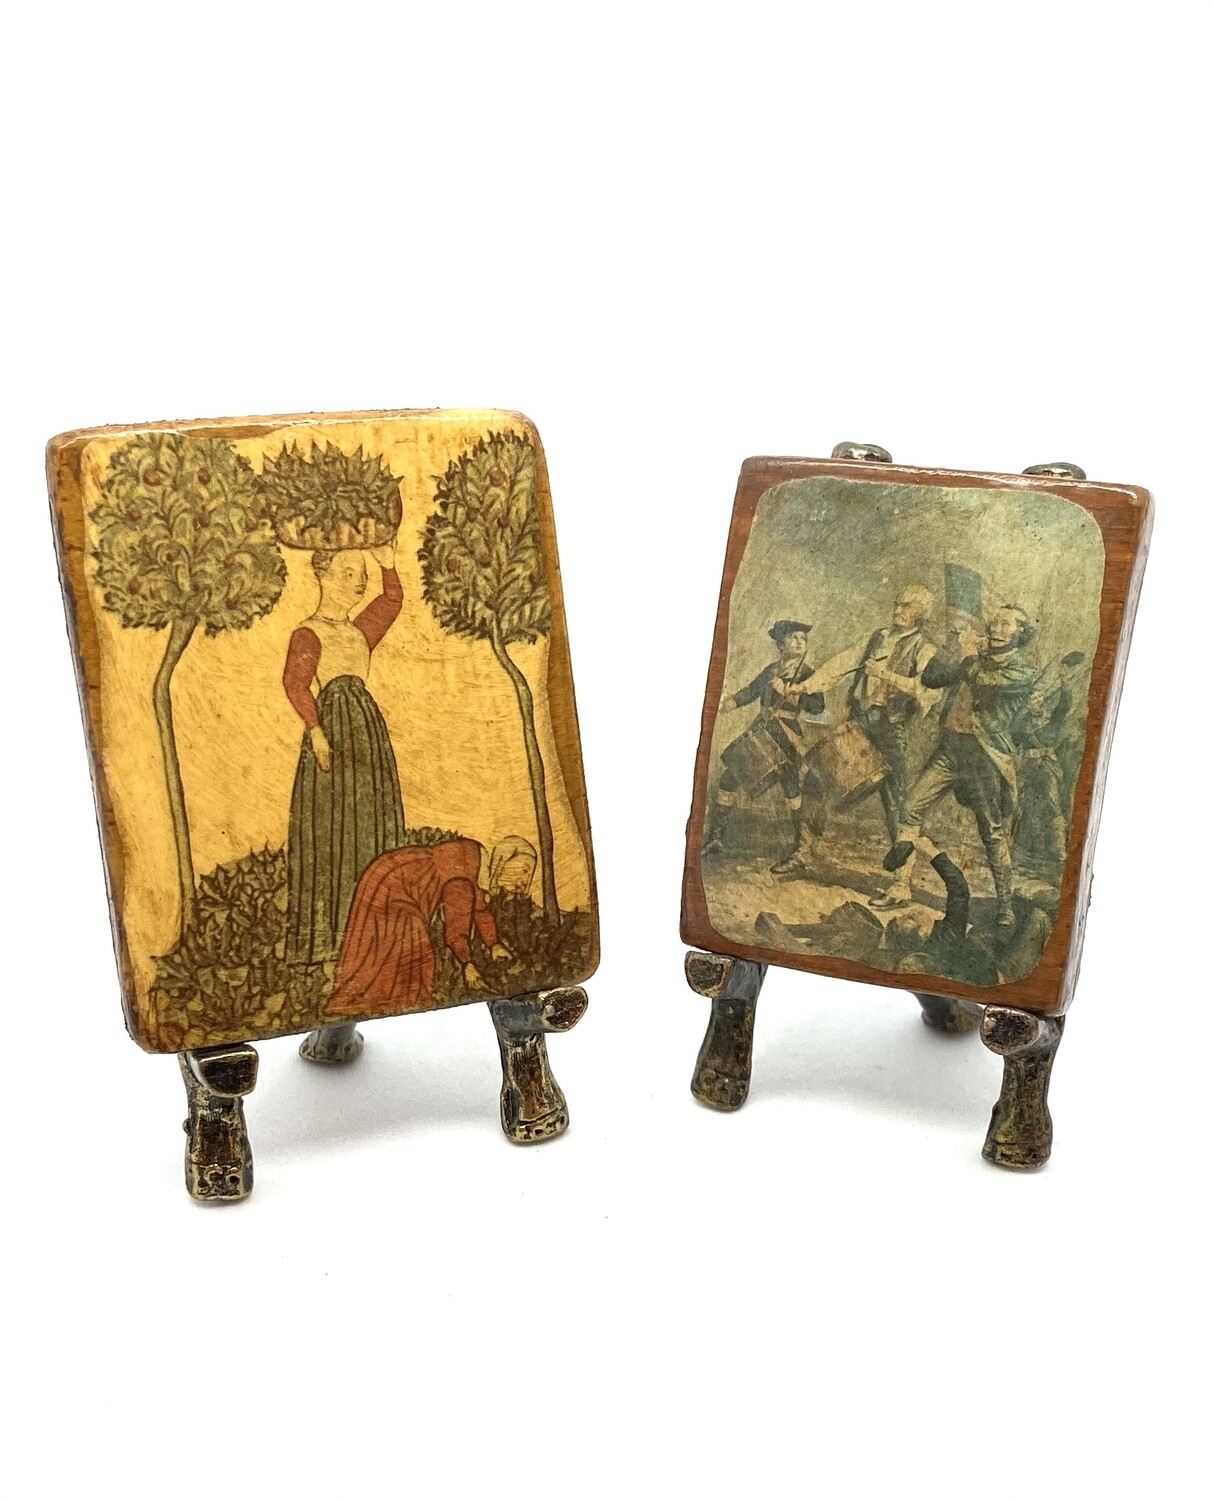 Miniature Wooden Art with 3” Metal Stand